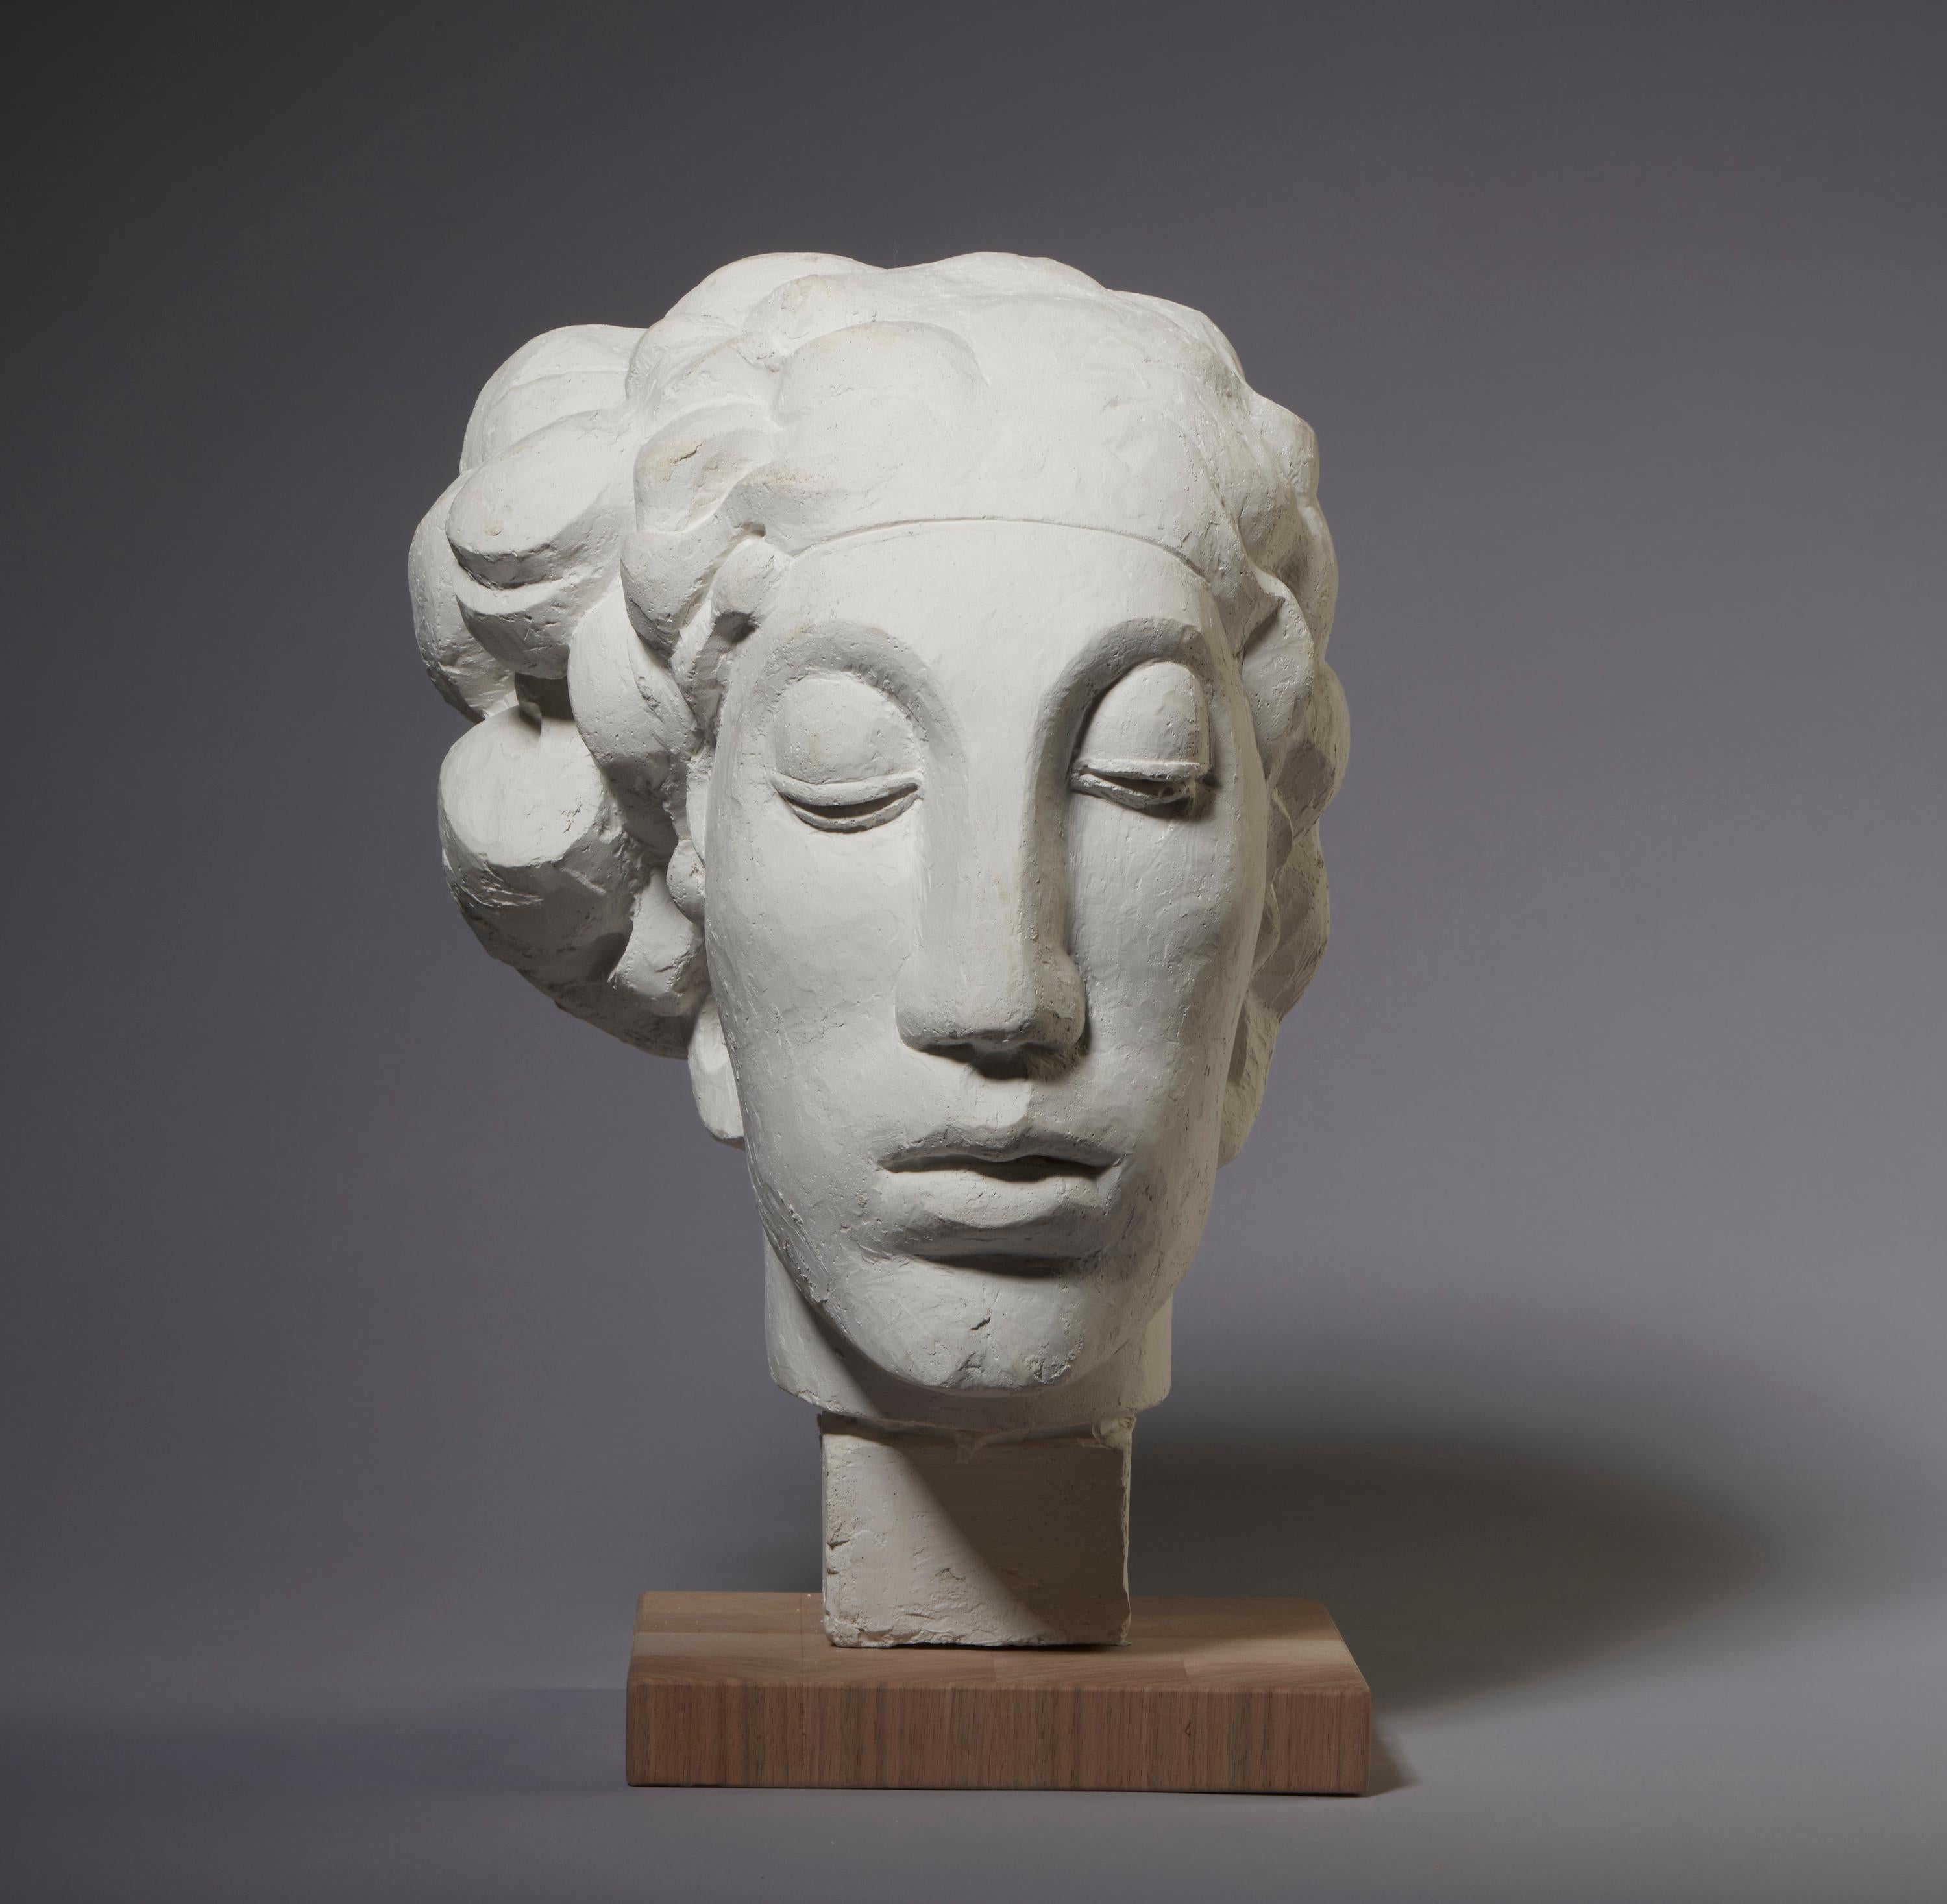 Giuseppe Rivadossi (Nave, July 8, 1935)

The Nazarene, 2009, 3/9
plaster sculpture

Head of young man with thick hair caught as, with half-closed eyes and mouth, he experiences a moment of serene meditation.
Particularly interesting is the